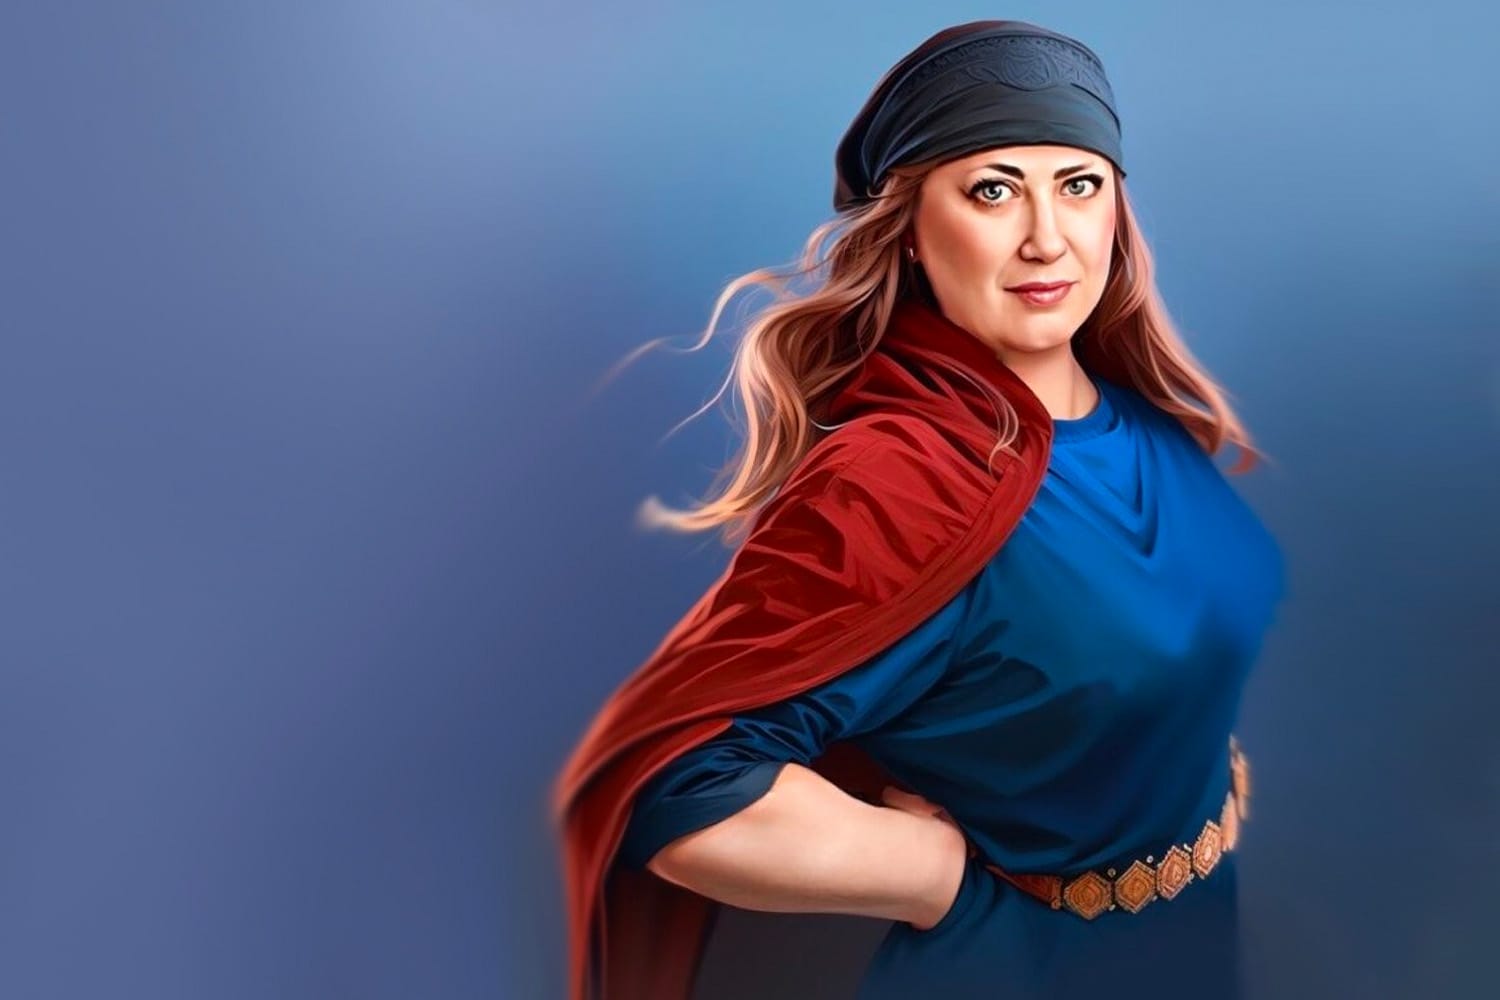 Comedian Rachel Creeger poses, super-woman esque, with a maroon cape against a blue background.